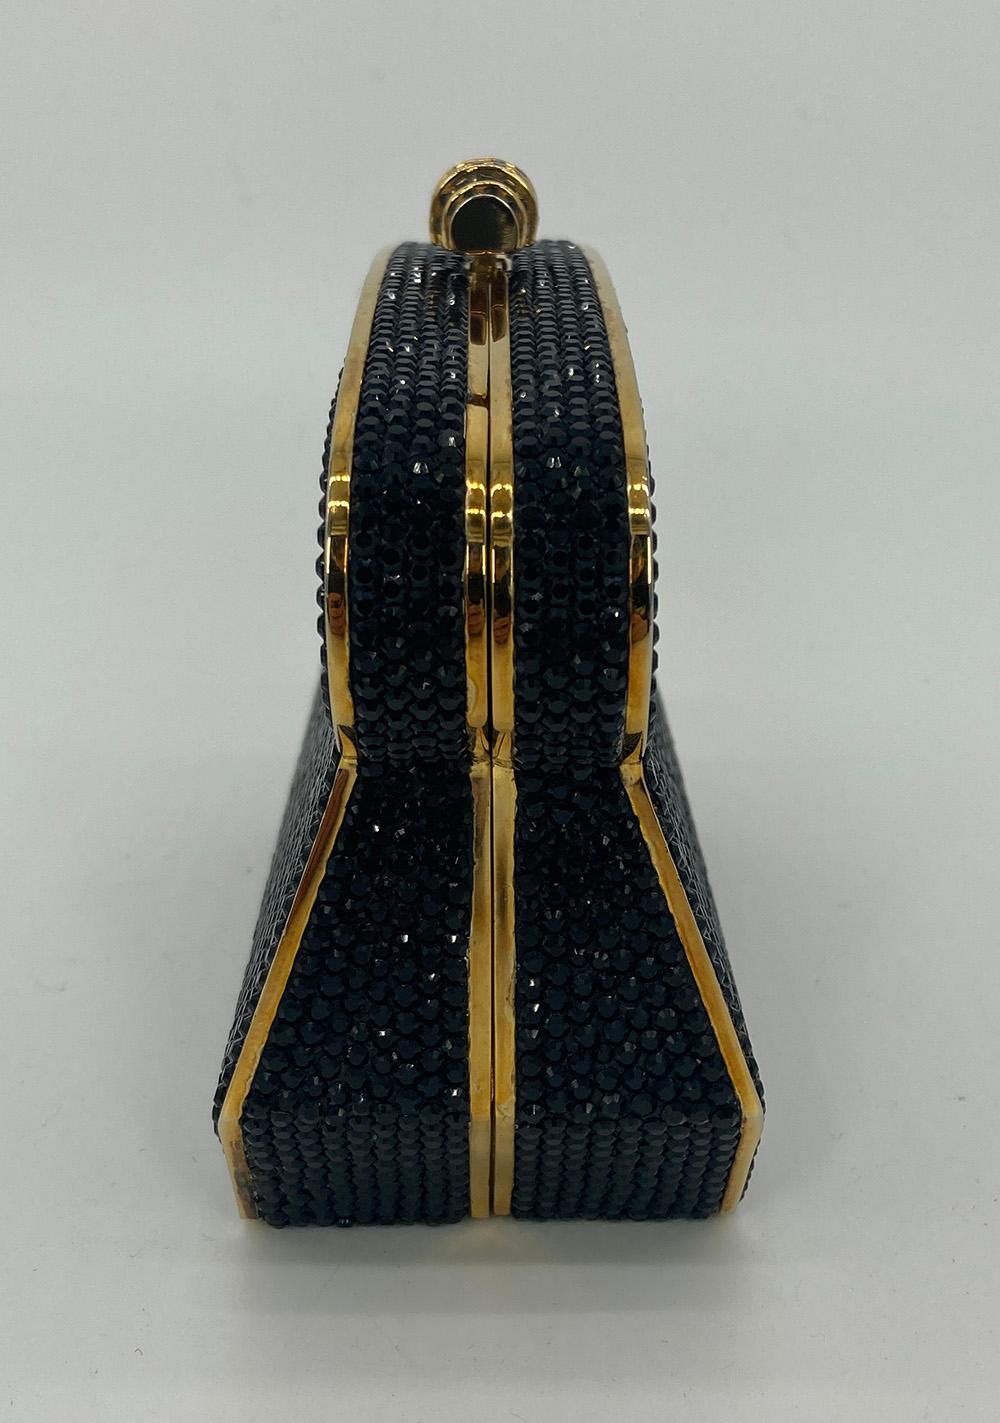 Judith Leiber Black Crystal Bread Loaf Minaudiere in excellent condition. Black crystal exterior trimmed with gold hardware and top button closure. Gold leather interior with attached gold chain shoulder strap. Overall excellent condition no stains